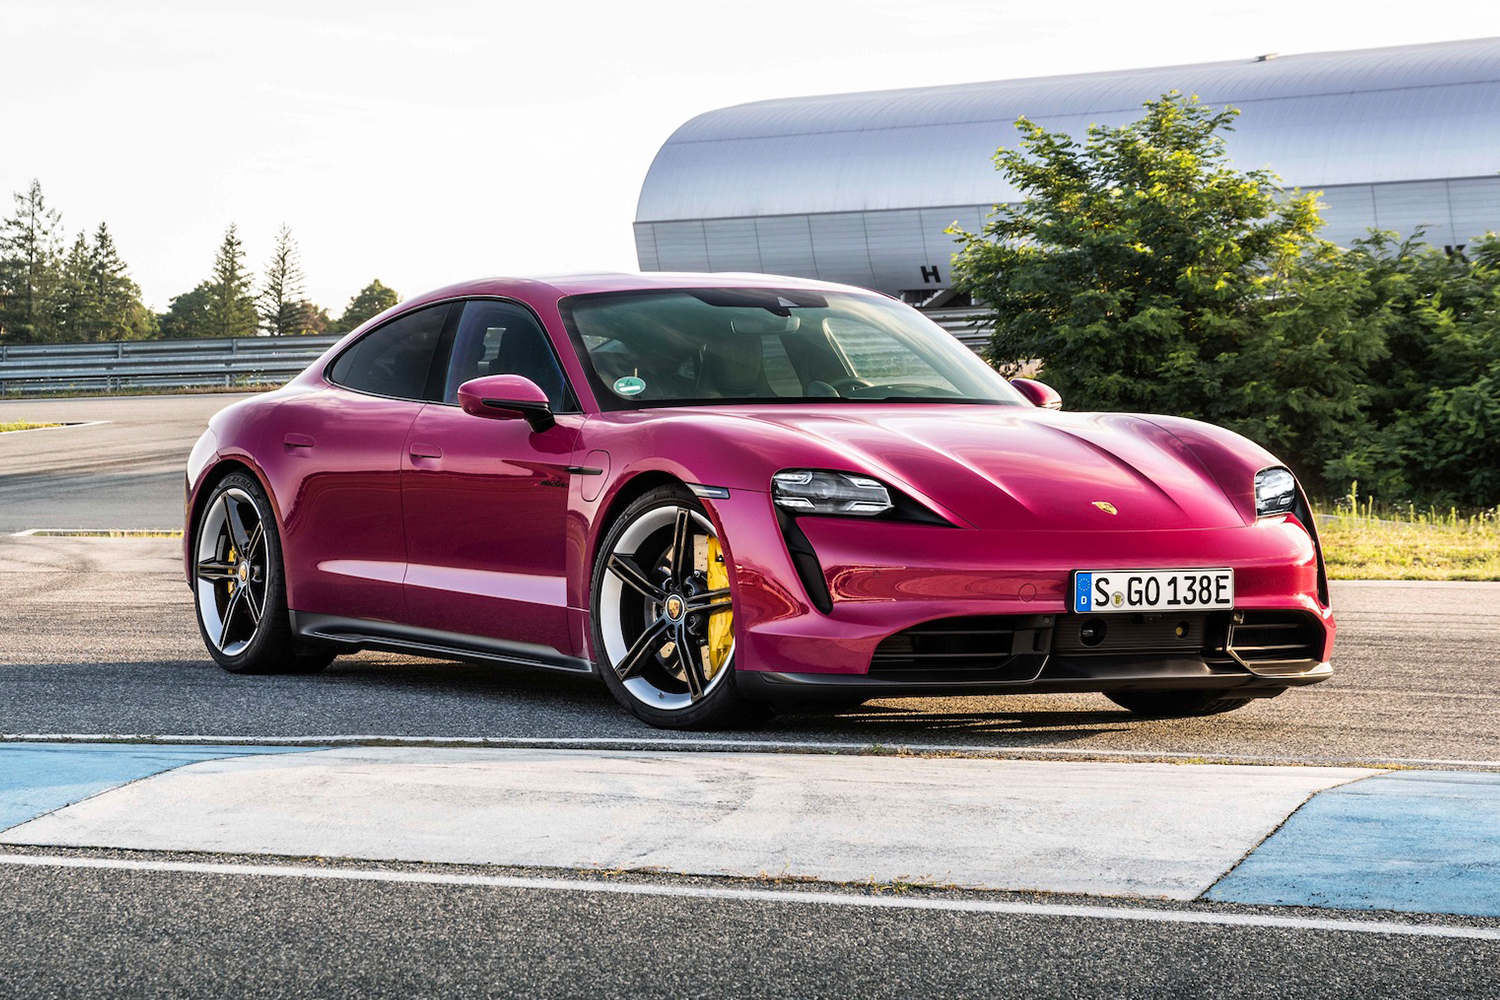 A Porsche Taycan in Rubystone Red. The electric car is newly available in the heritage color, but the more exciting EV news comes from Porsche's partnership with Rimac.